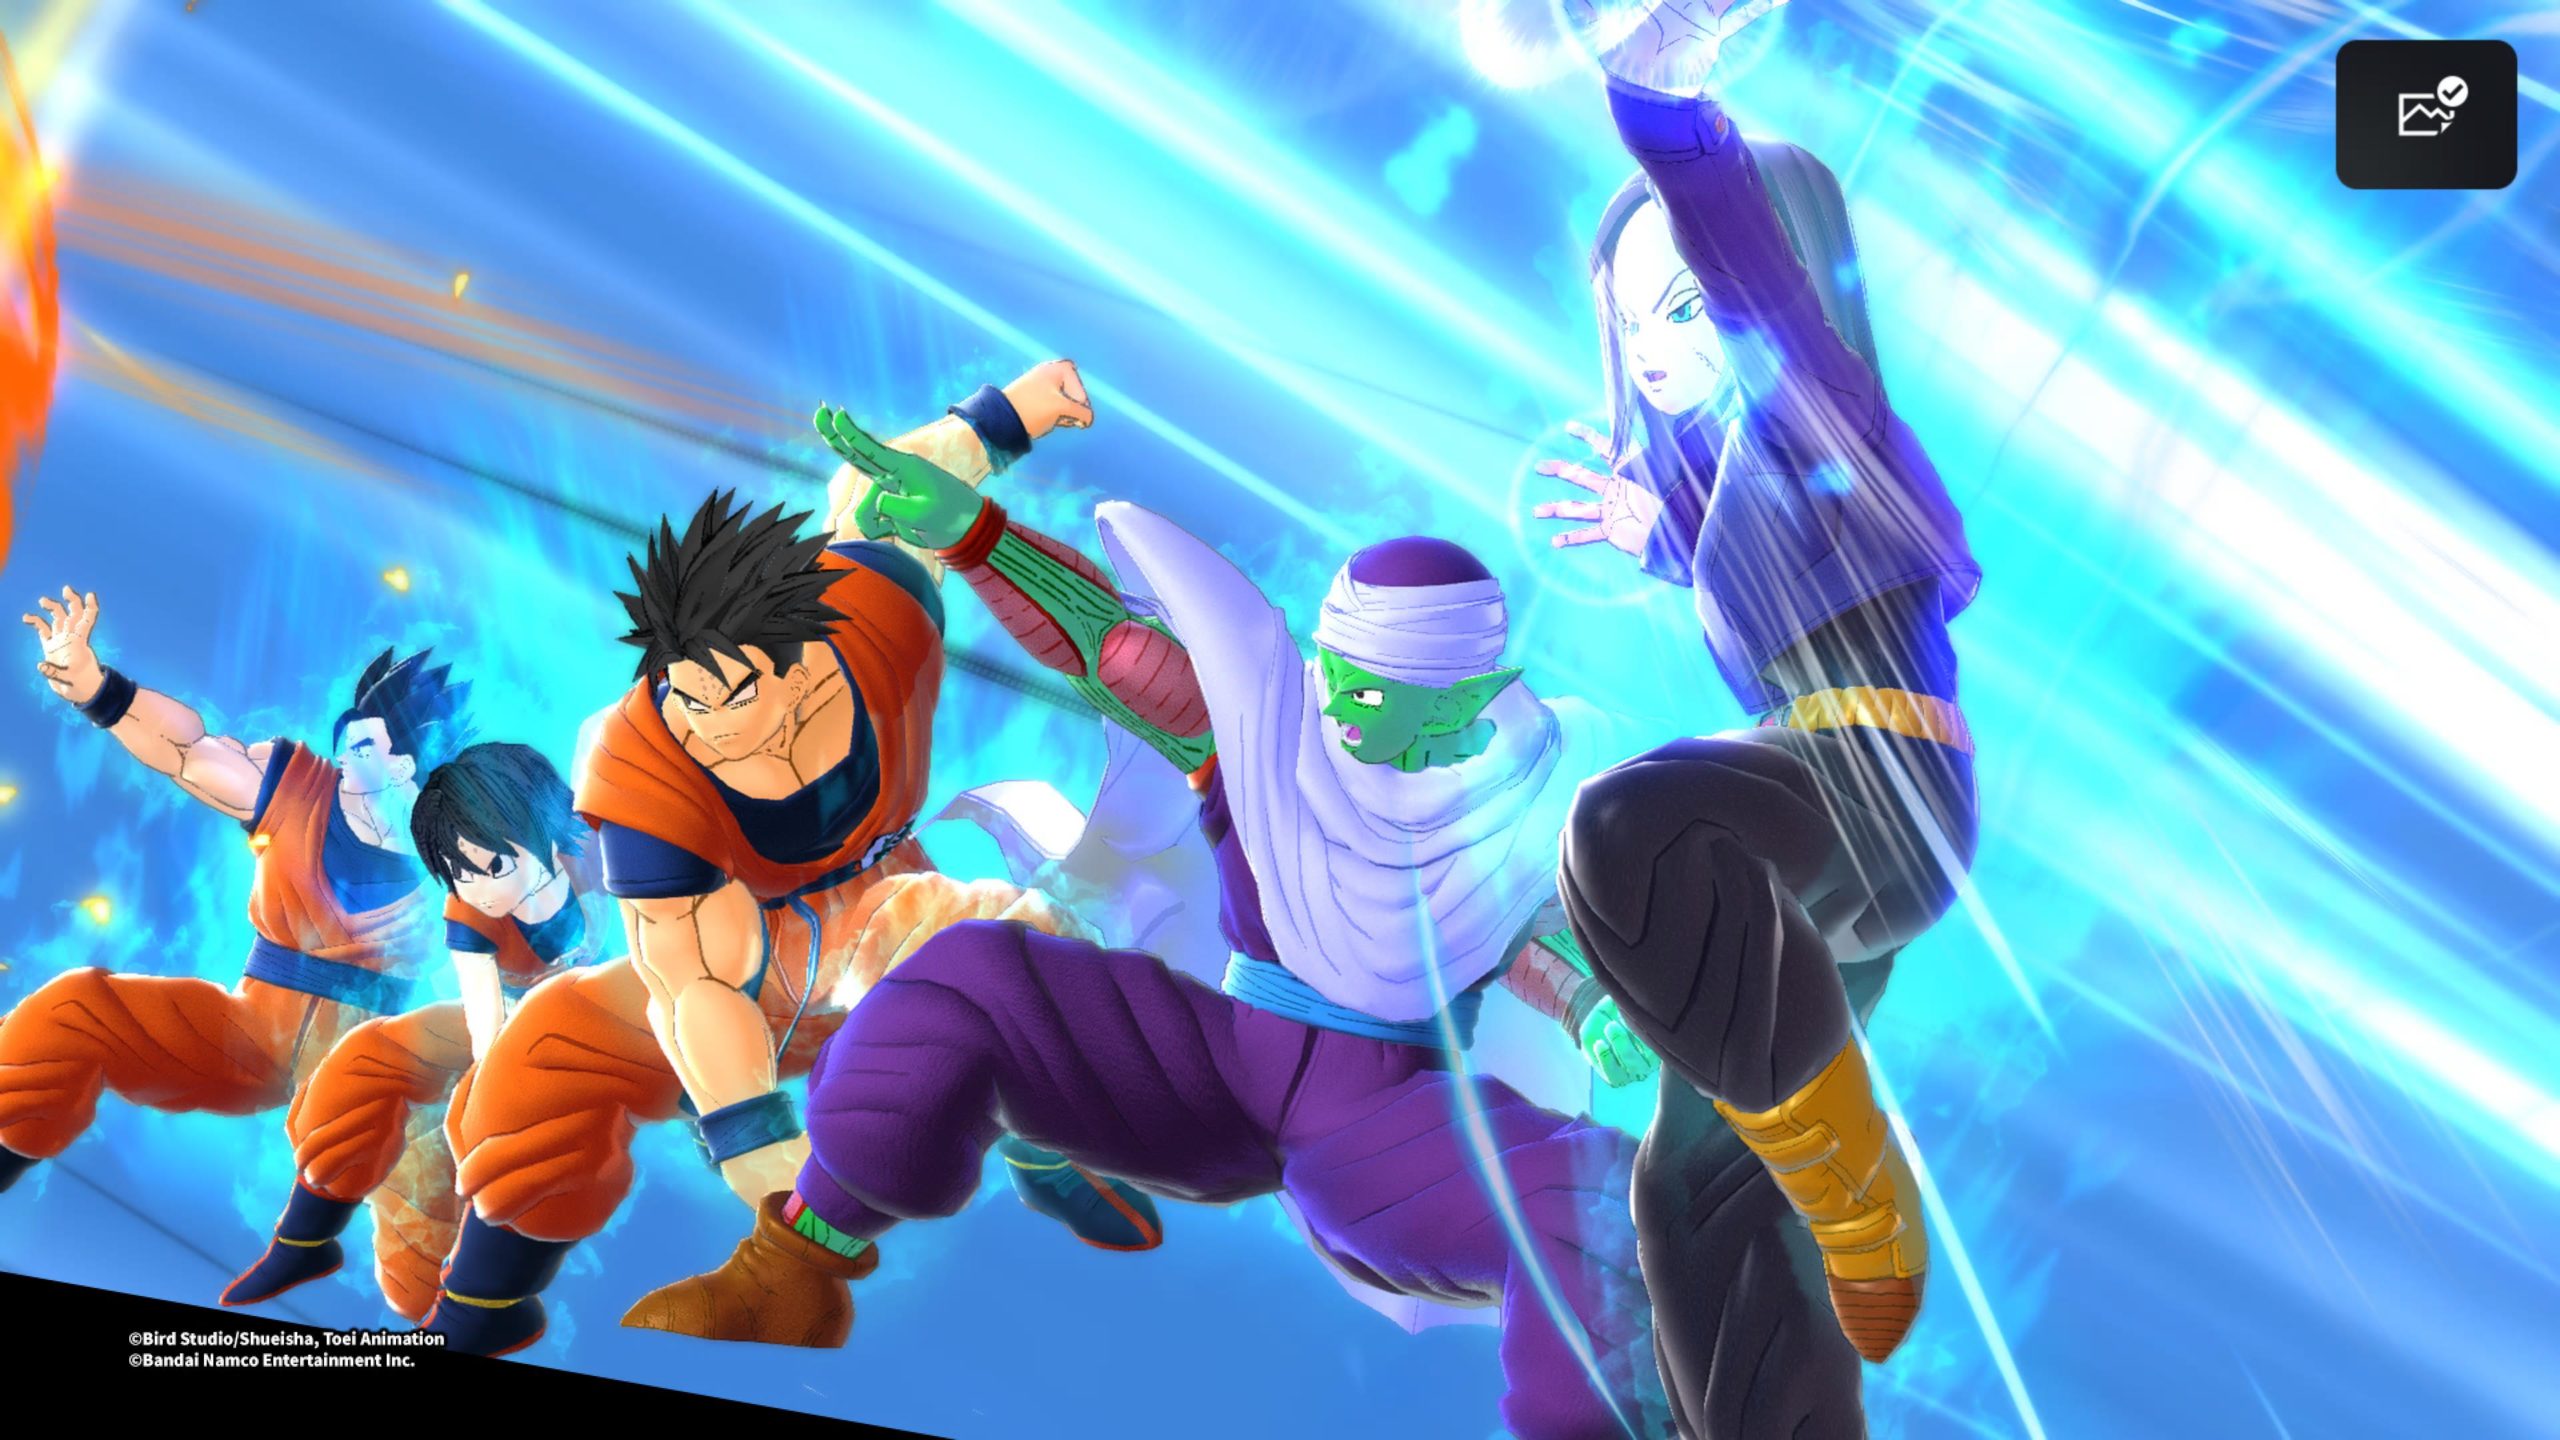 Dragon Ball: The Breakers review – Janky, unattractive, and